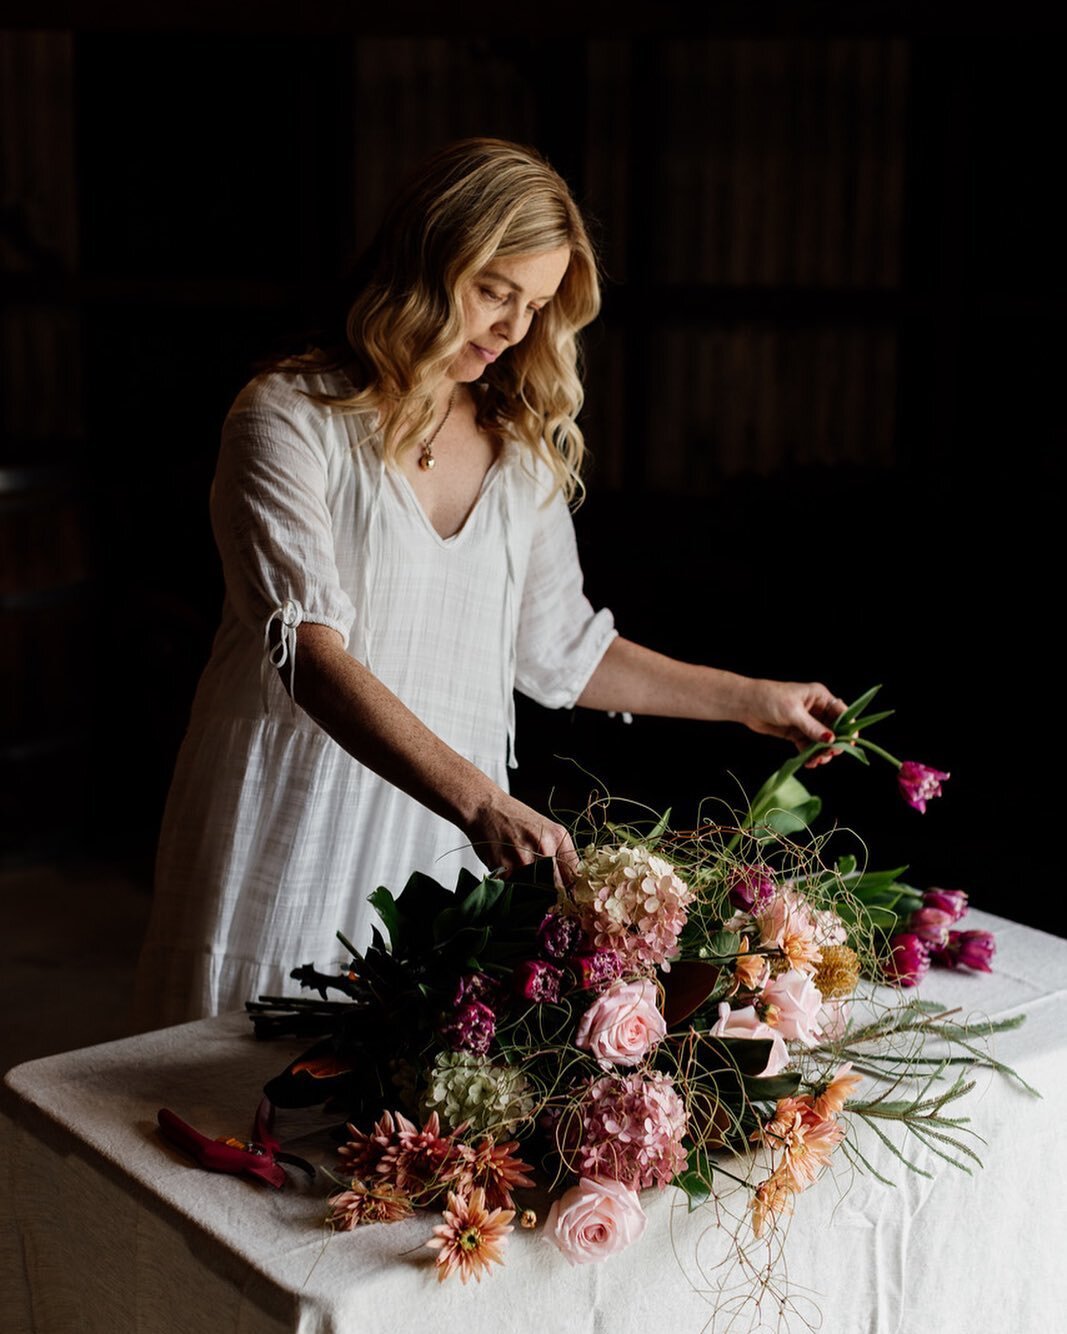 This is the lovely Nat who I got to photograph last week for her floristry business.  Nat had a strong direction in what she wanted for her branding, which always makes for a great shoot.  We discussed colours and mood boards to make sure we created 